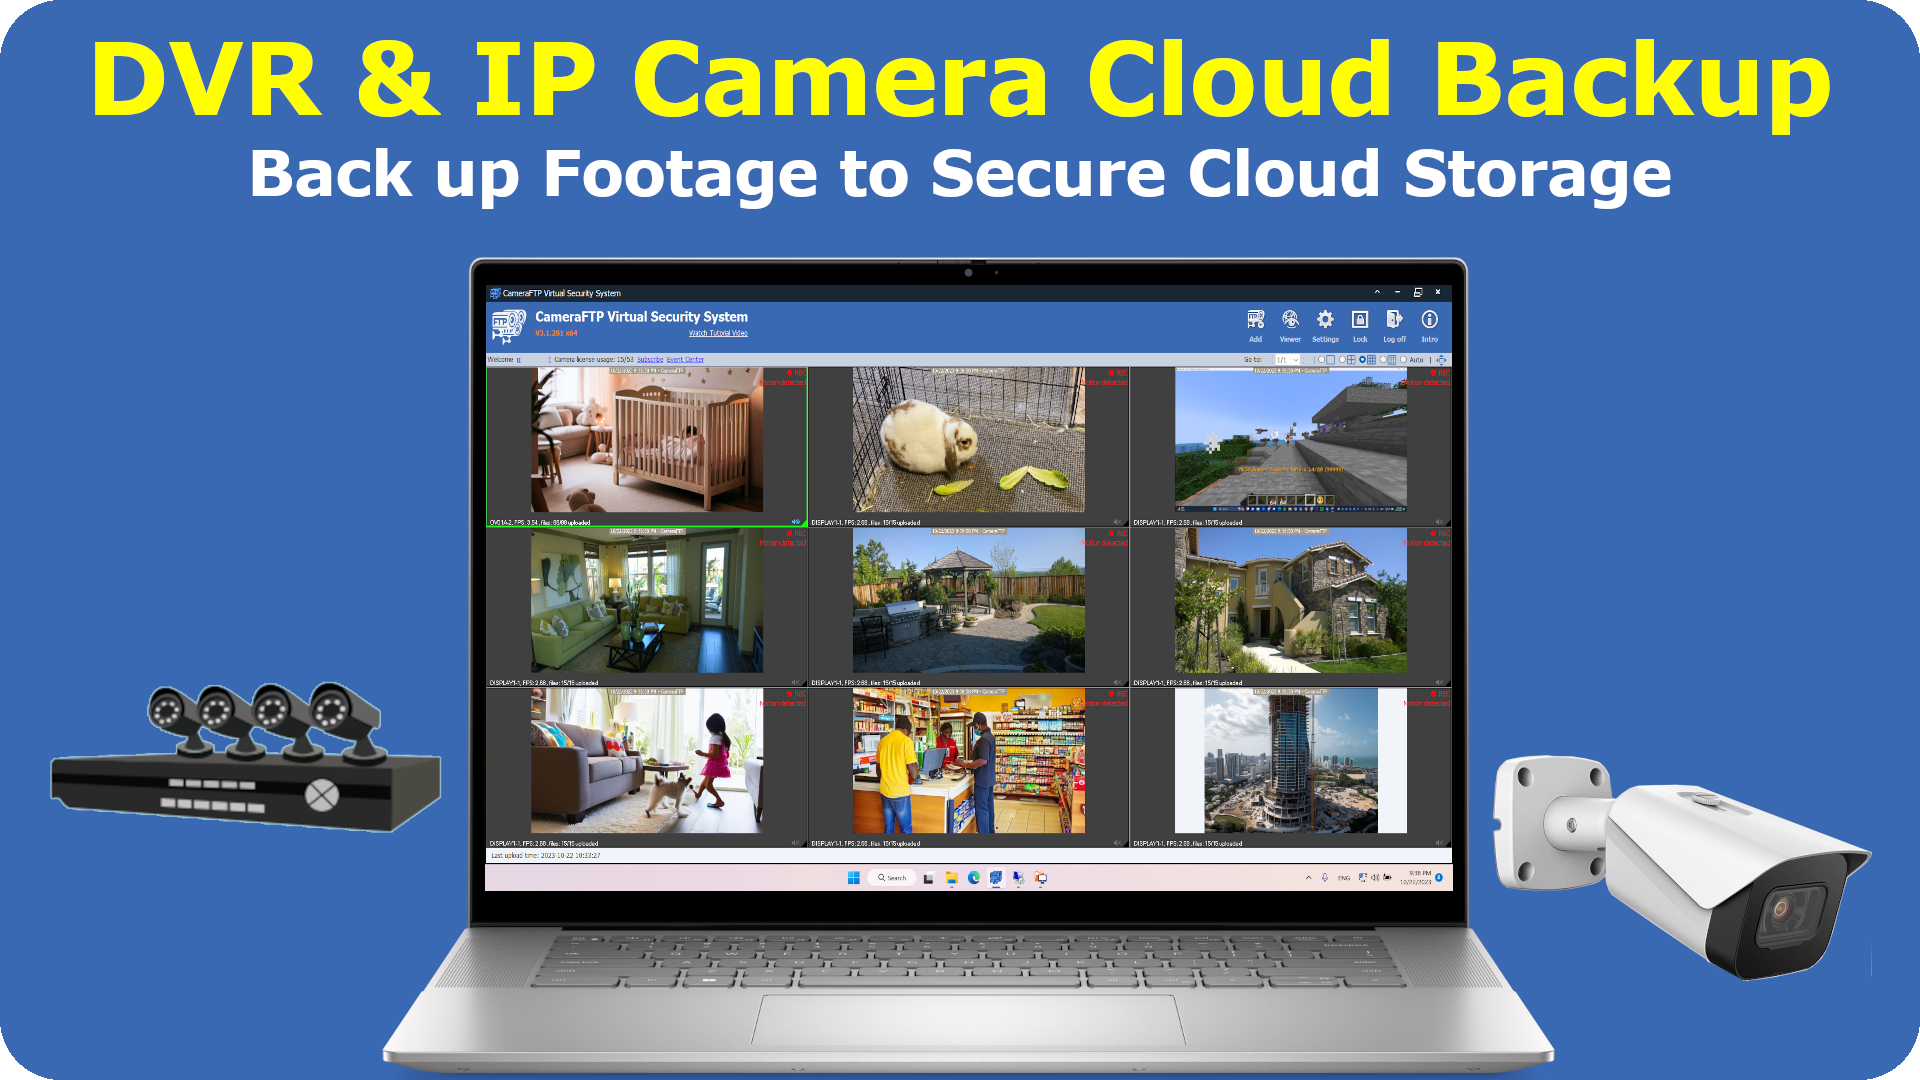 DVR and IP Camera Cloud Backup, More Secure than Local Recording